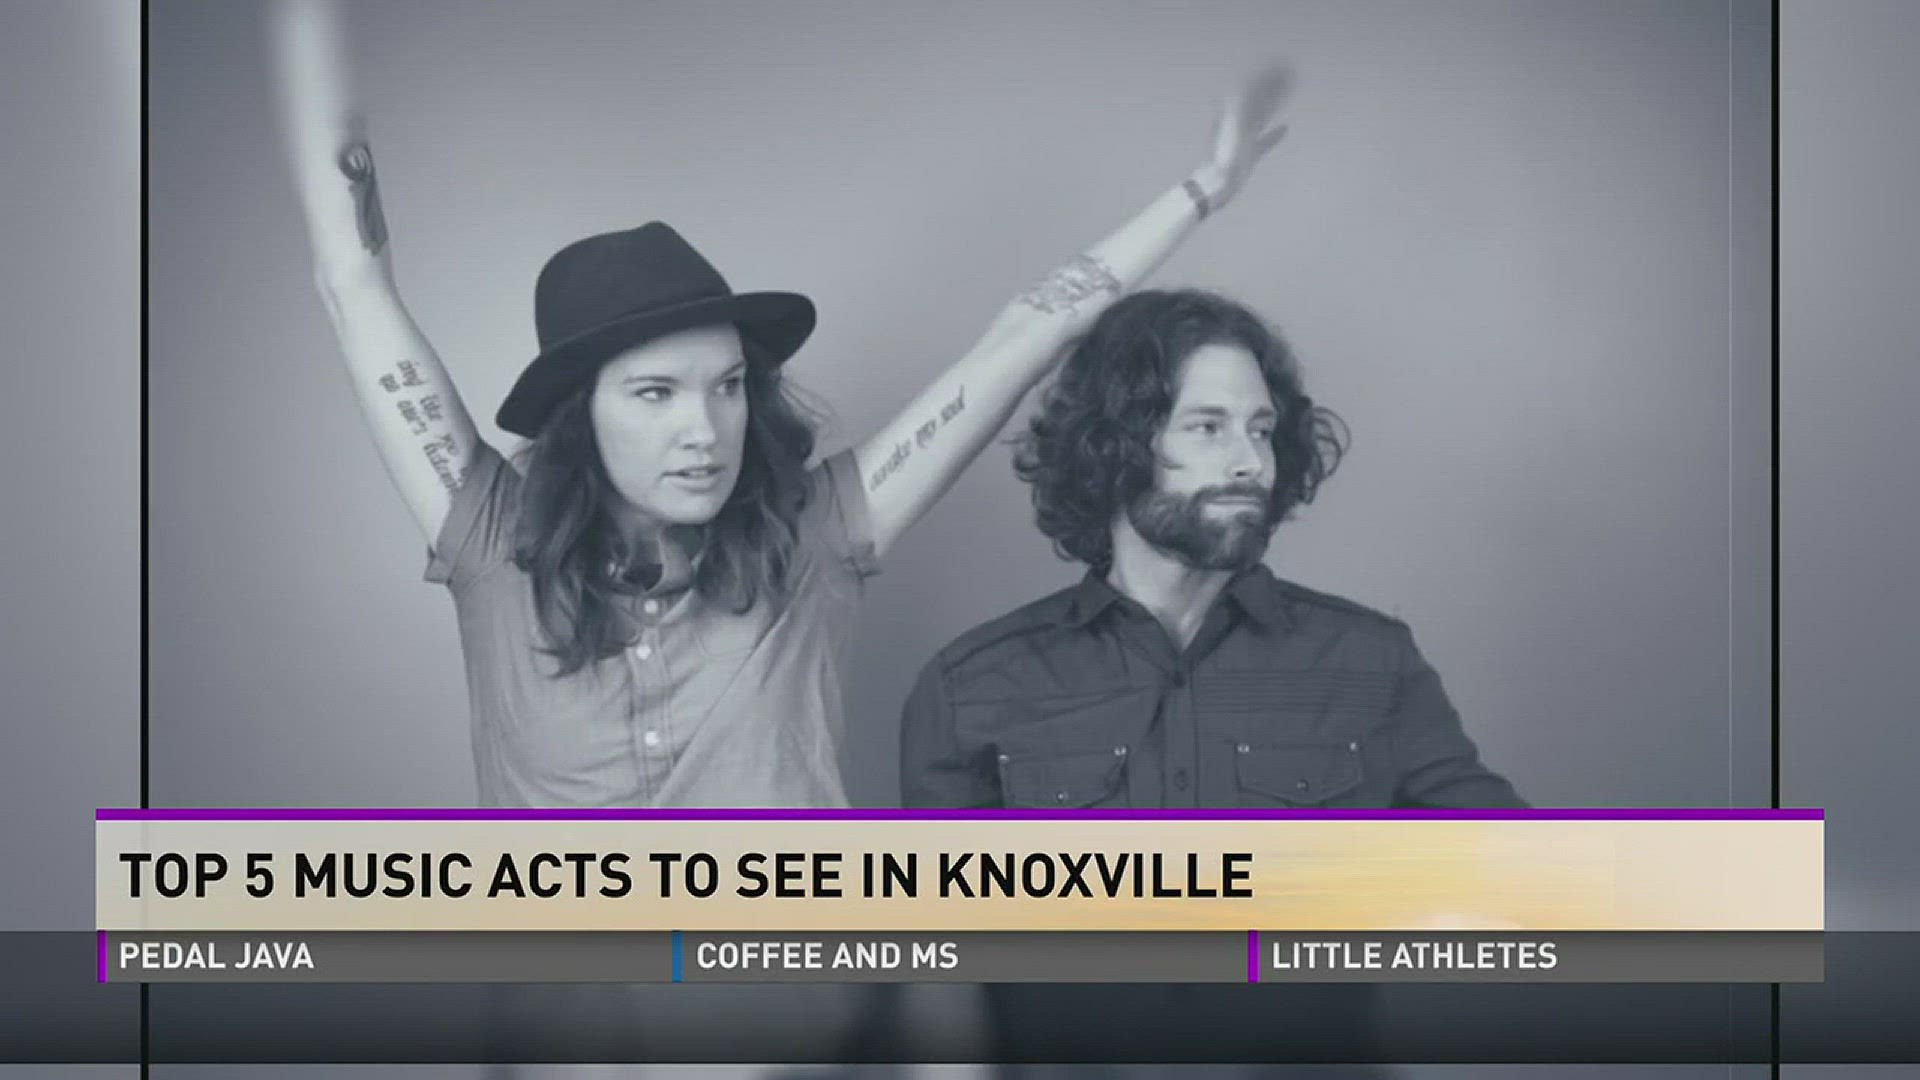 Top 5 Music Acts to See in Knoxville